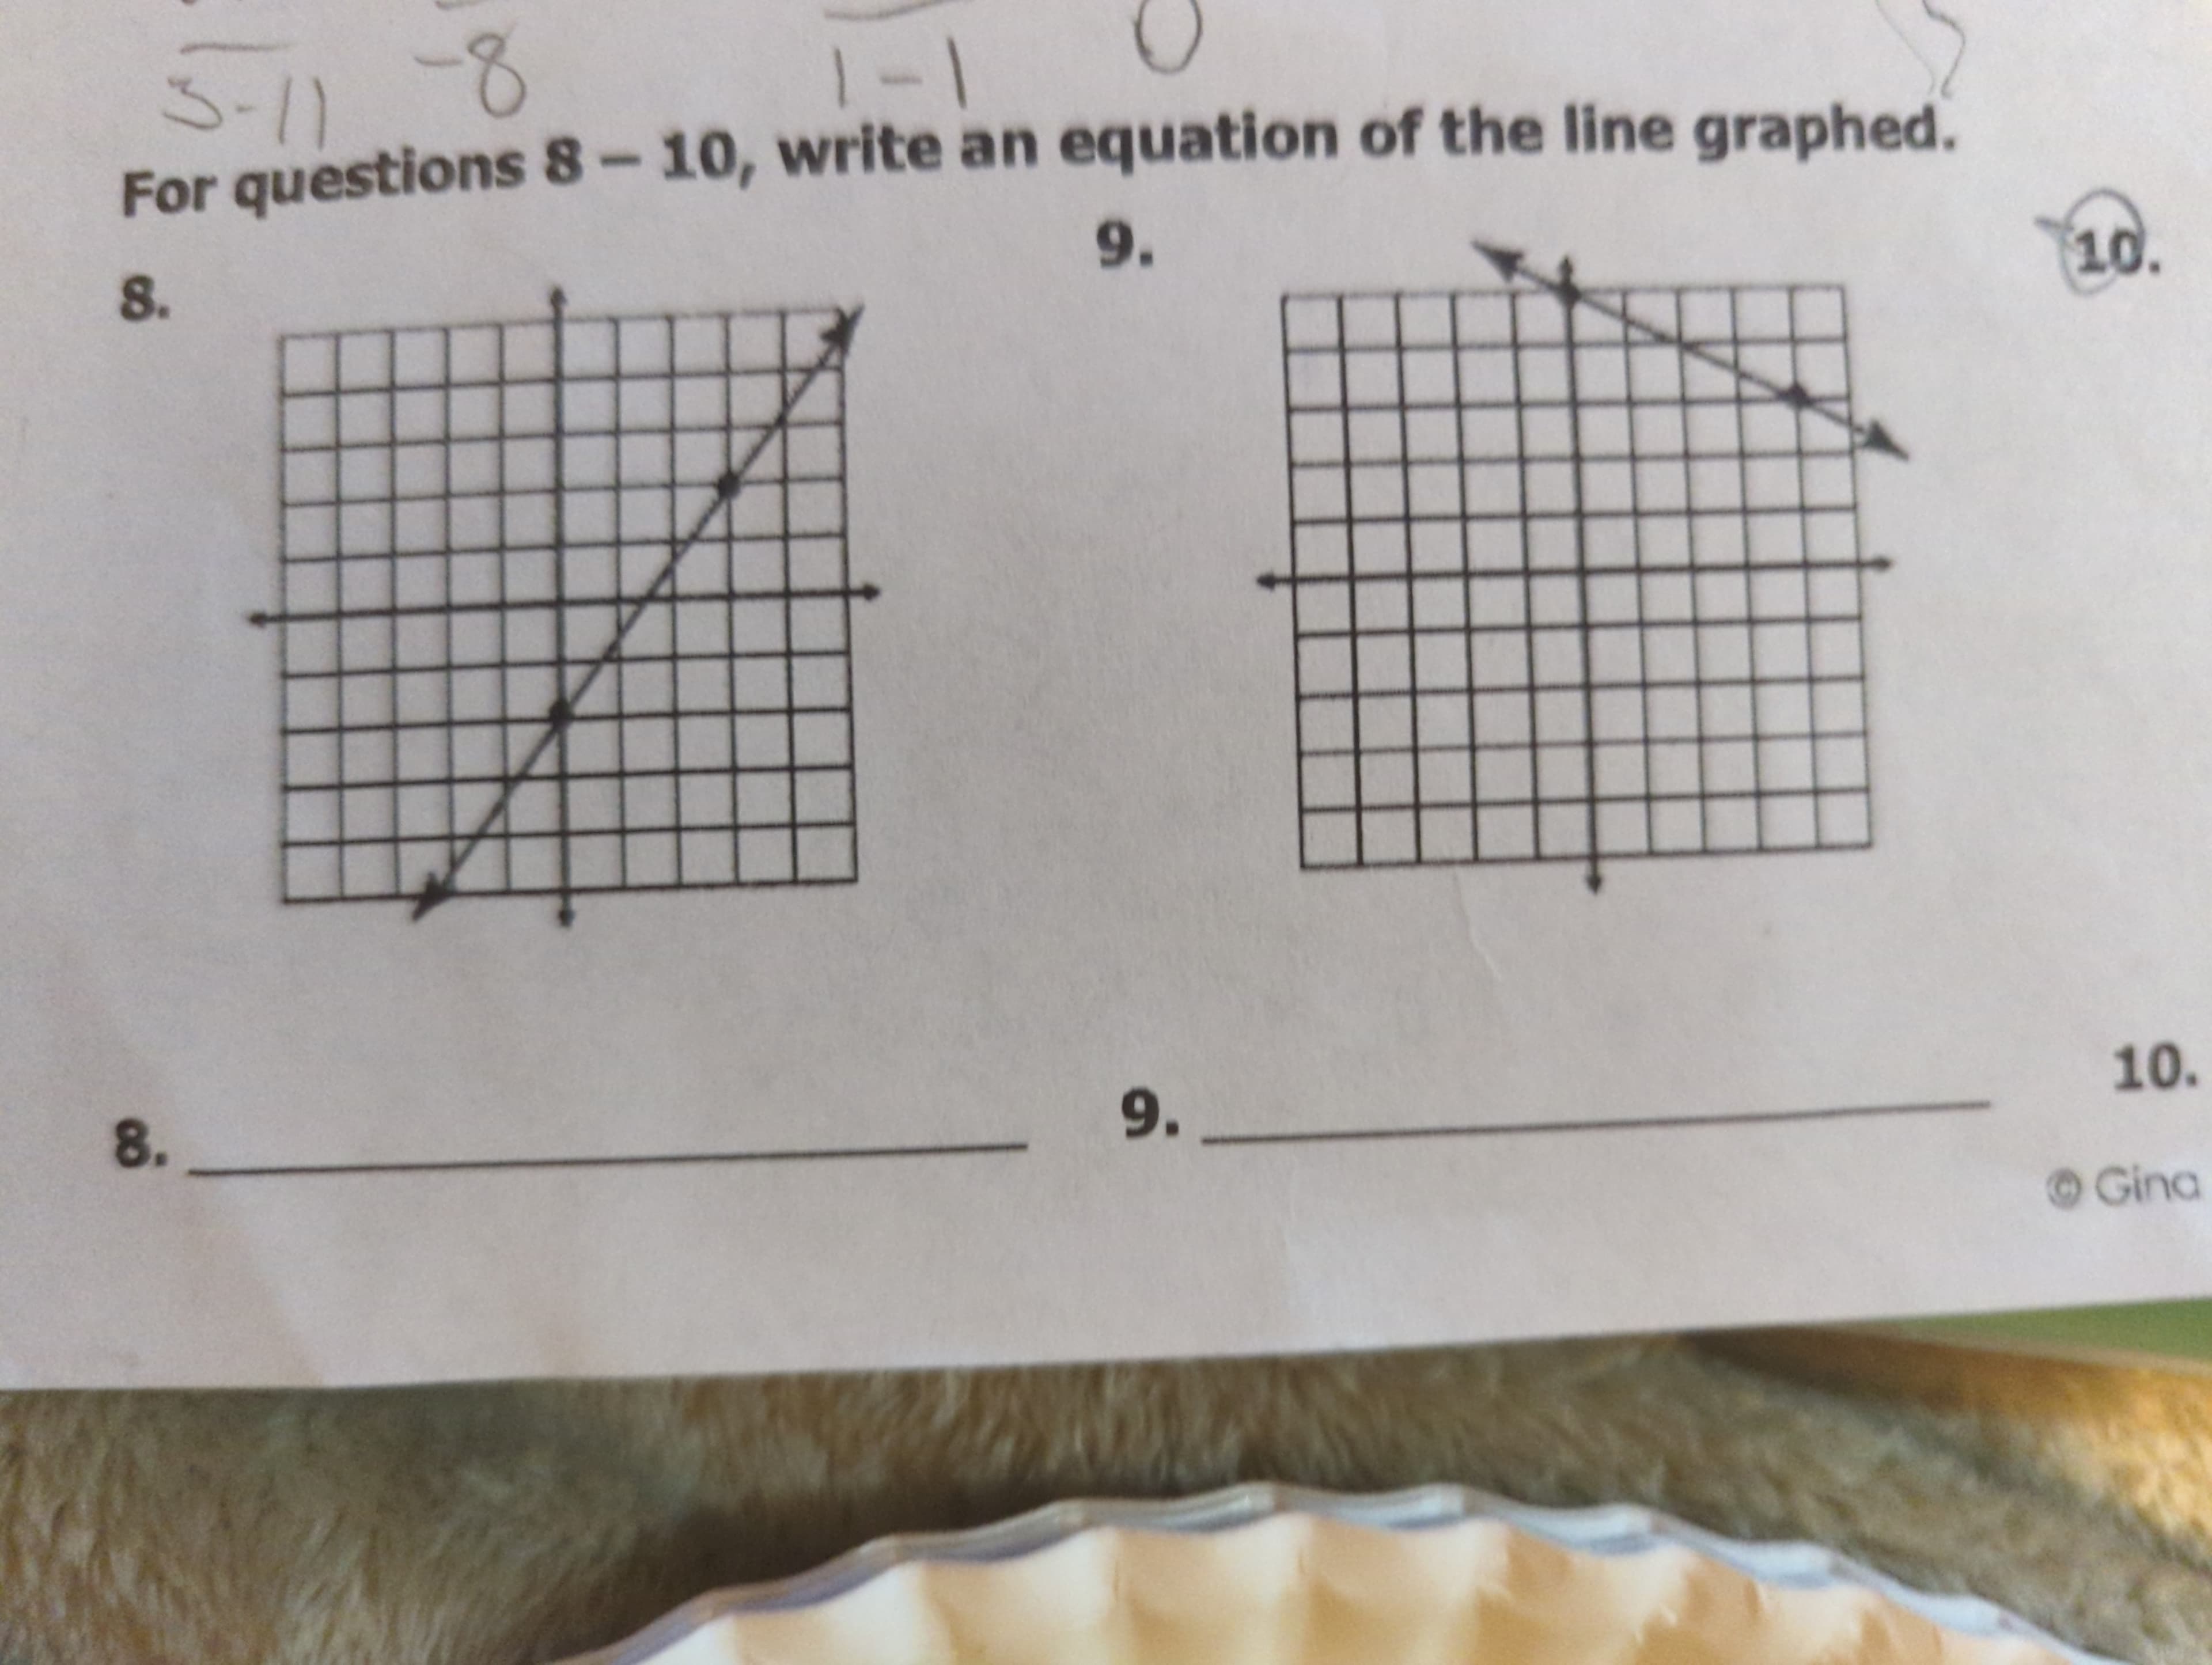 1-1
For questions 8-10, write an equation of the line graphed.
811-5
9.
8.
10.
8.
9.
OGina
